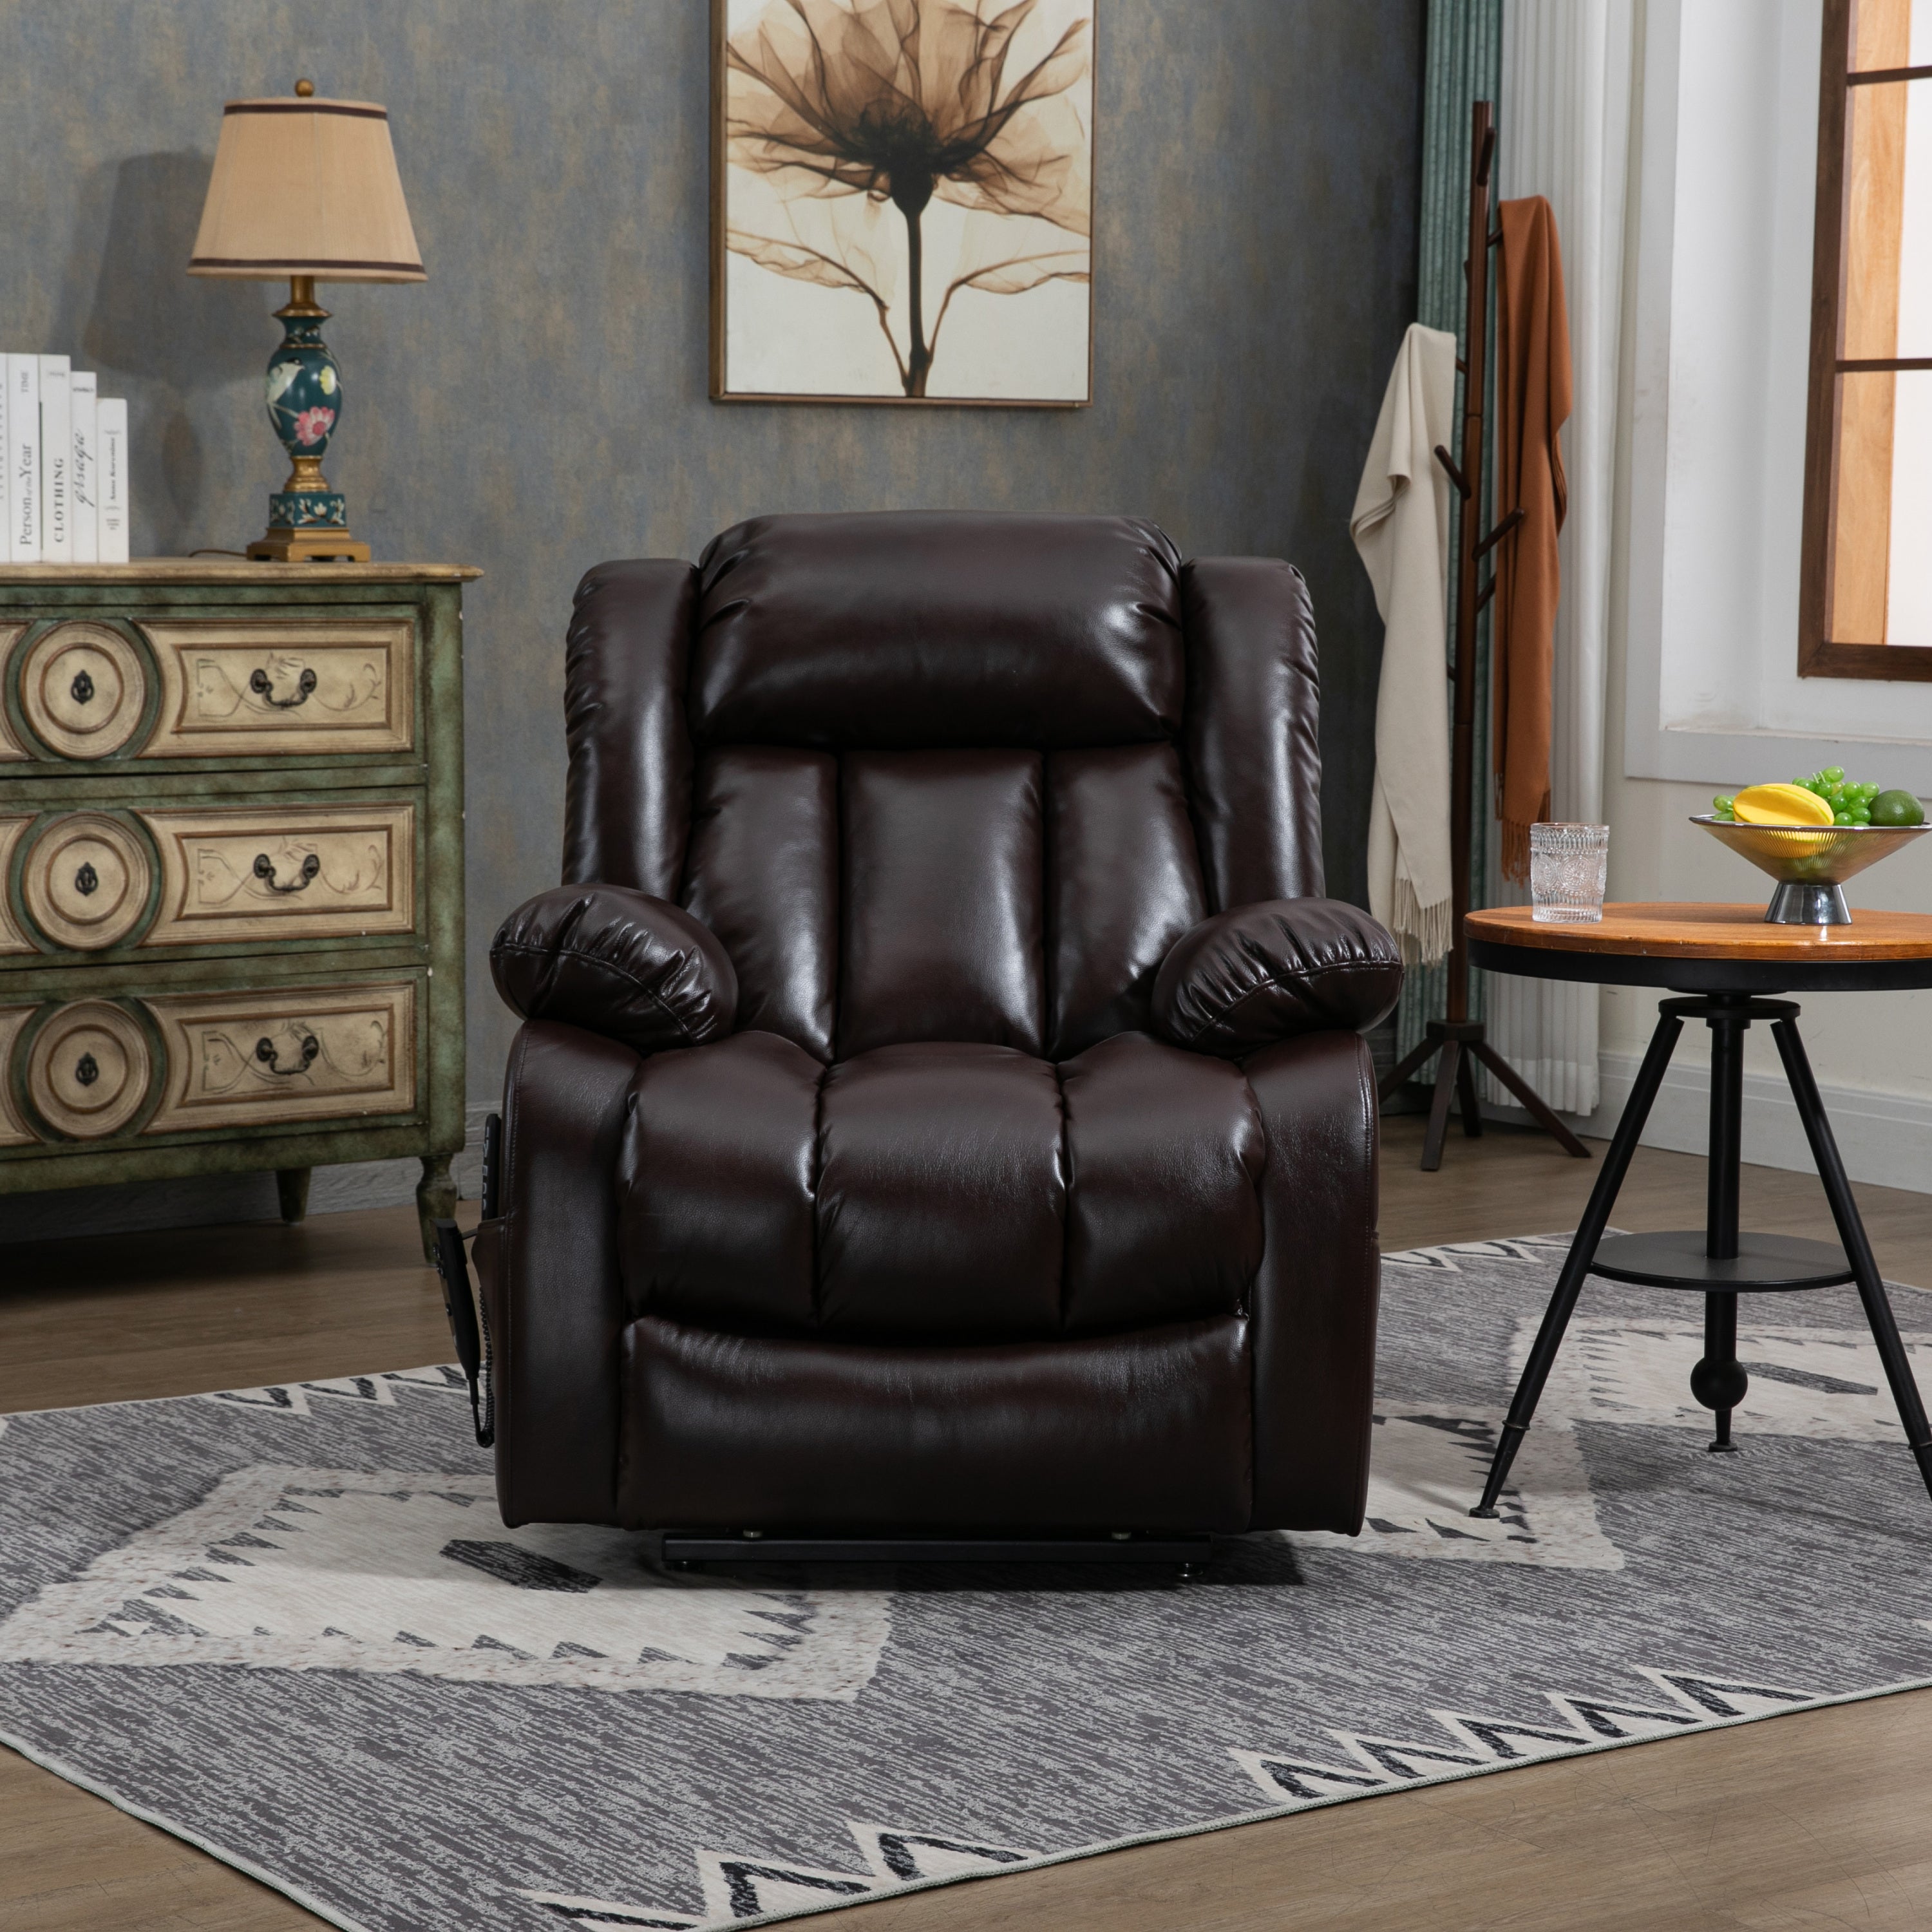 Brown Power Lift Recliner Chair in seated position